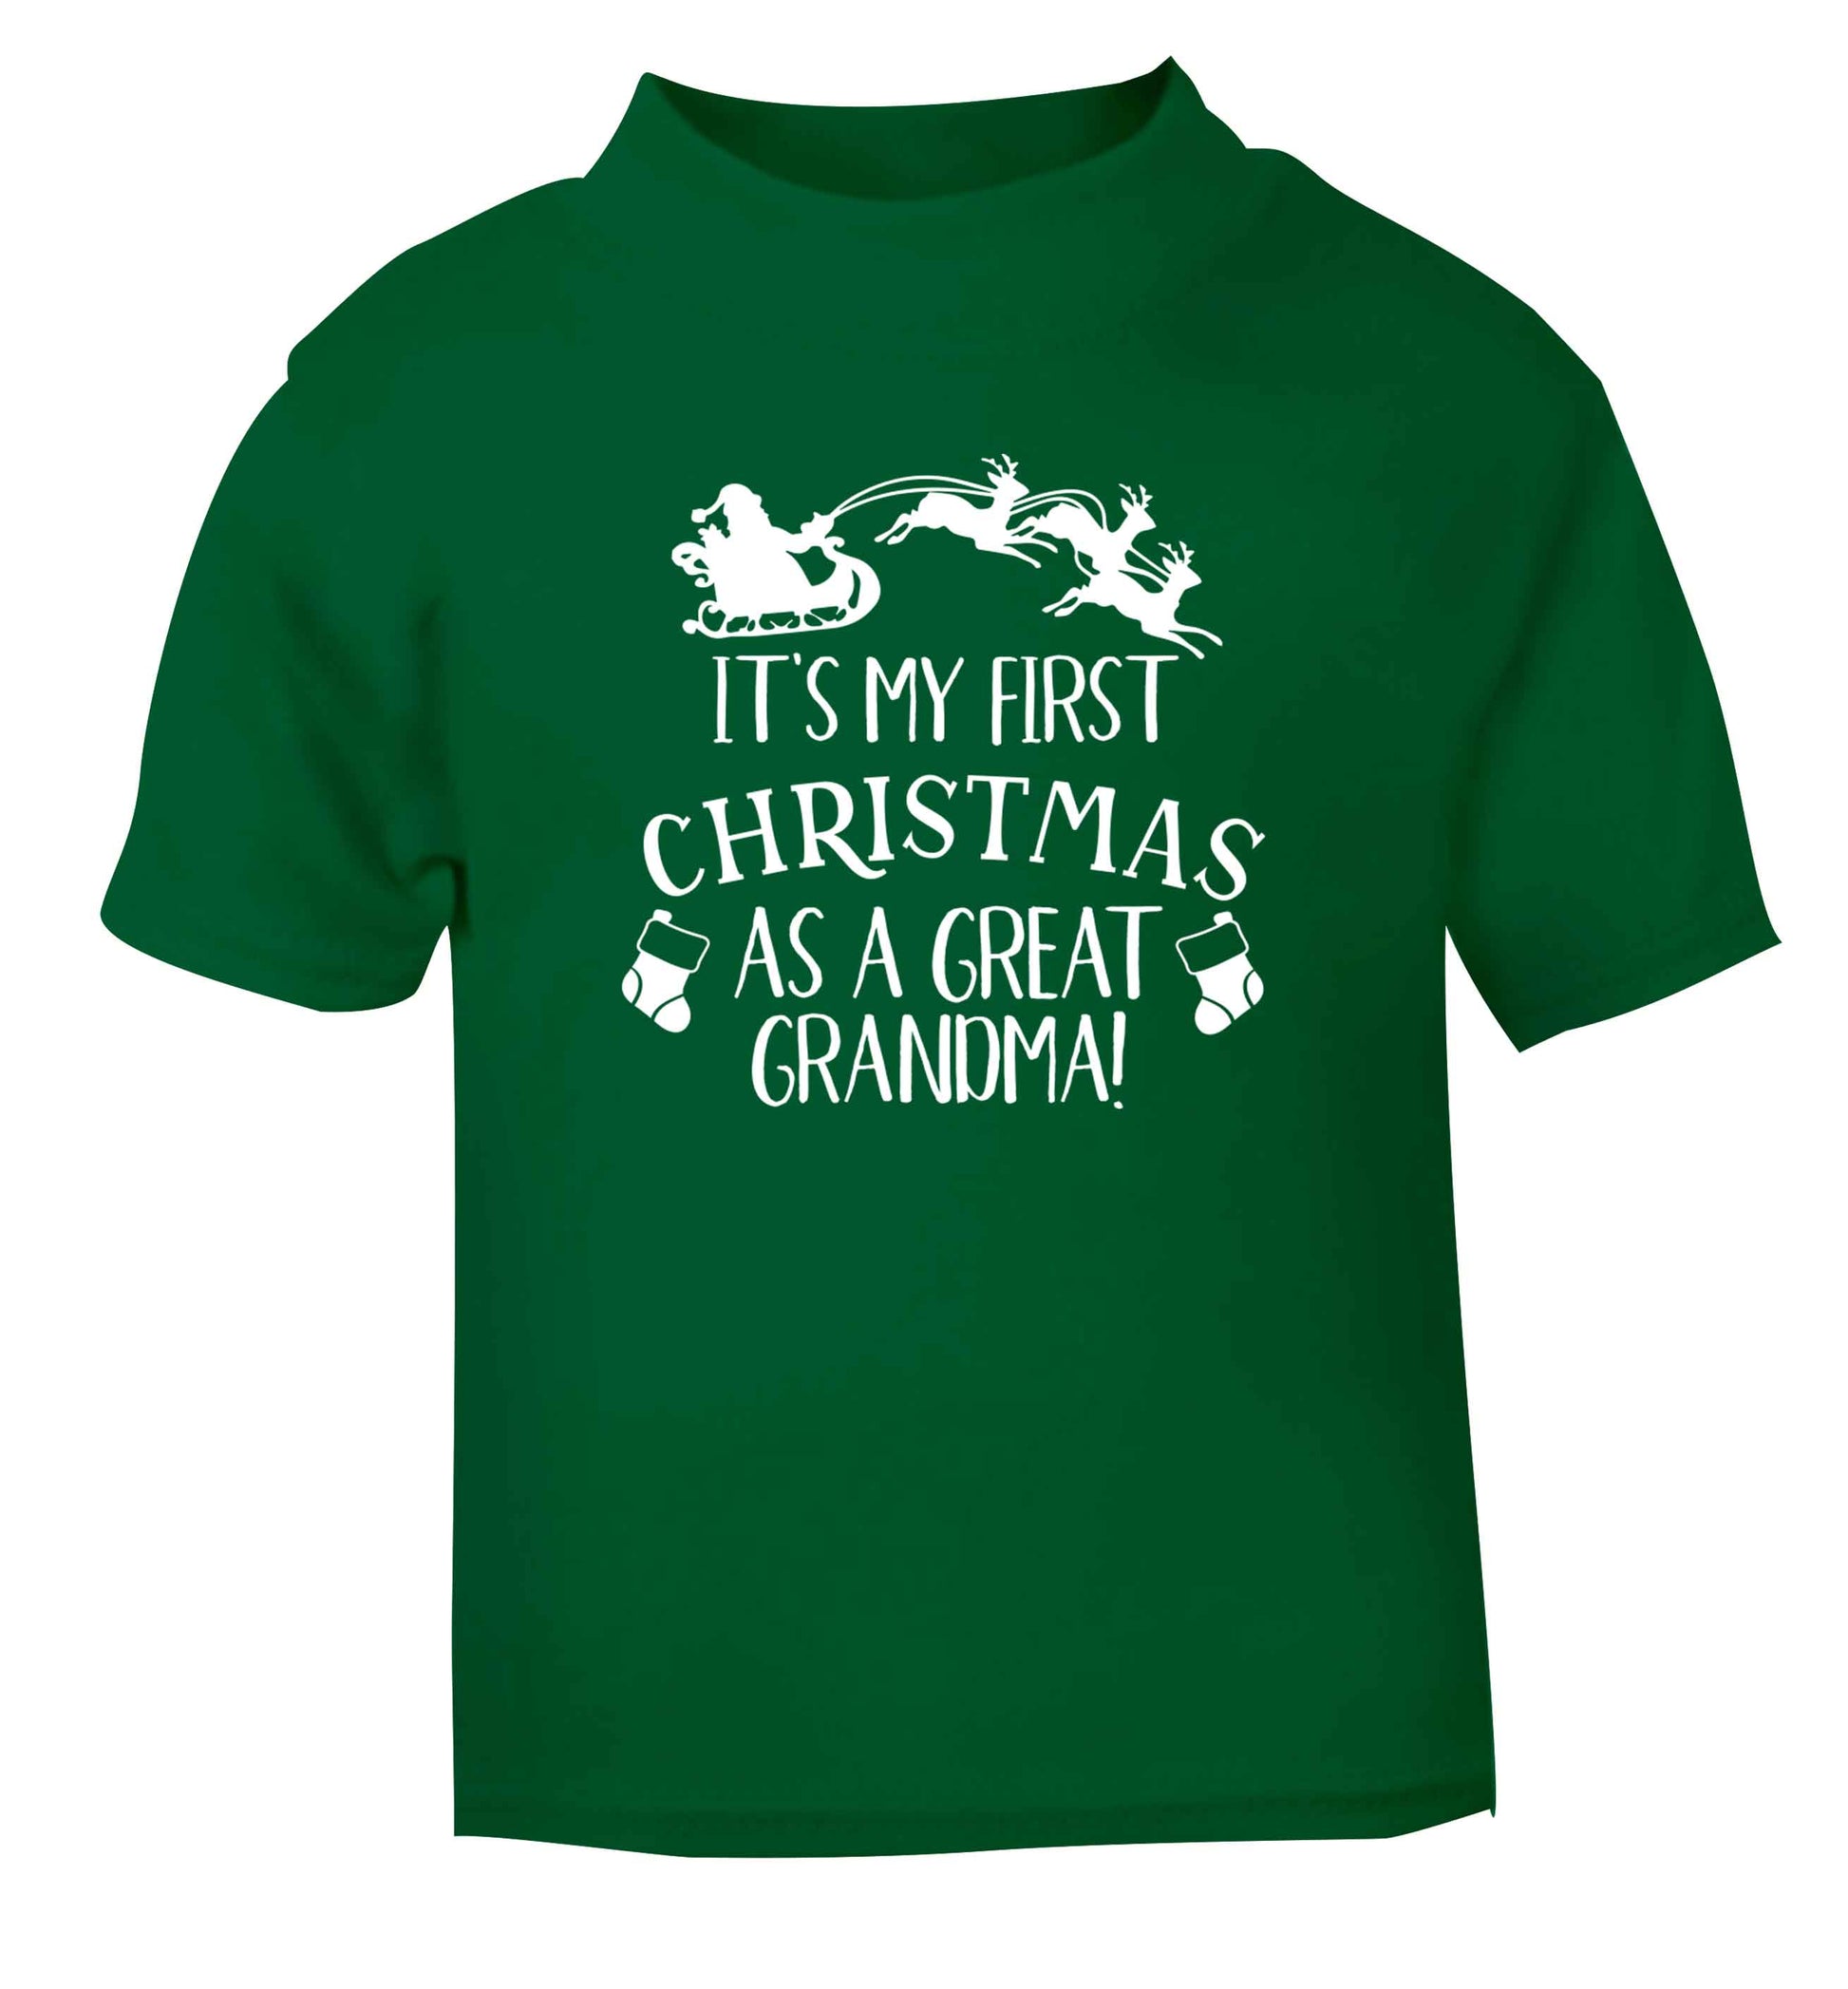 It's my first Christmas as a great grandma! green Baby Toddler Tshirt 2 Years